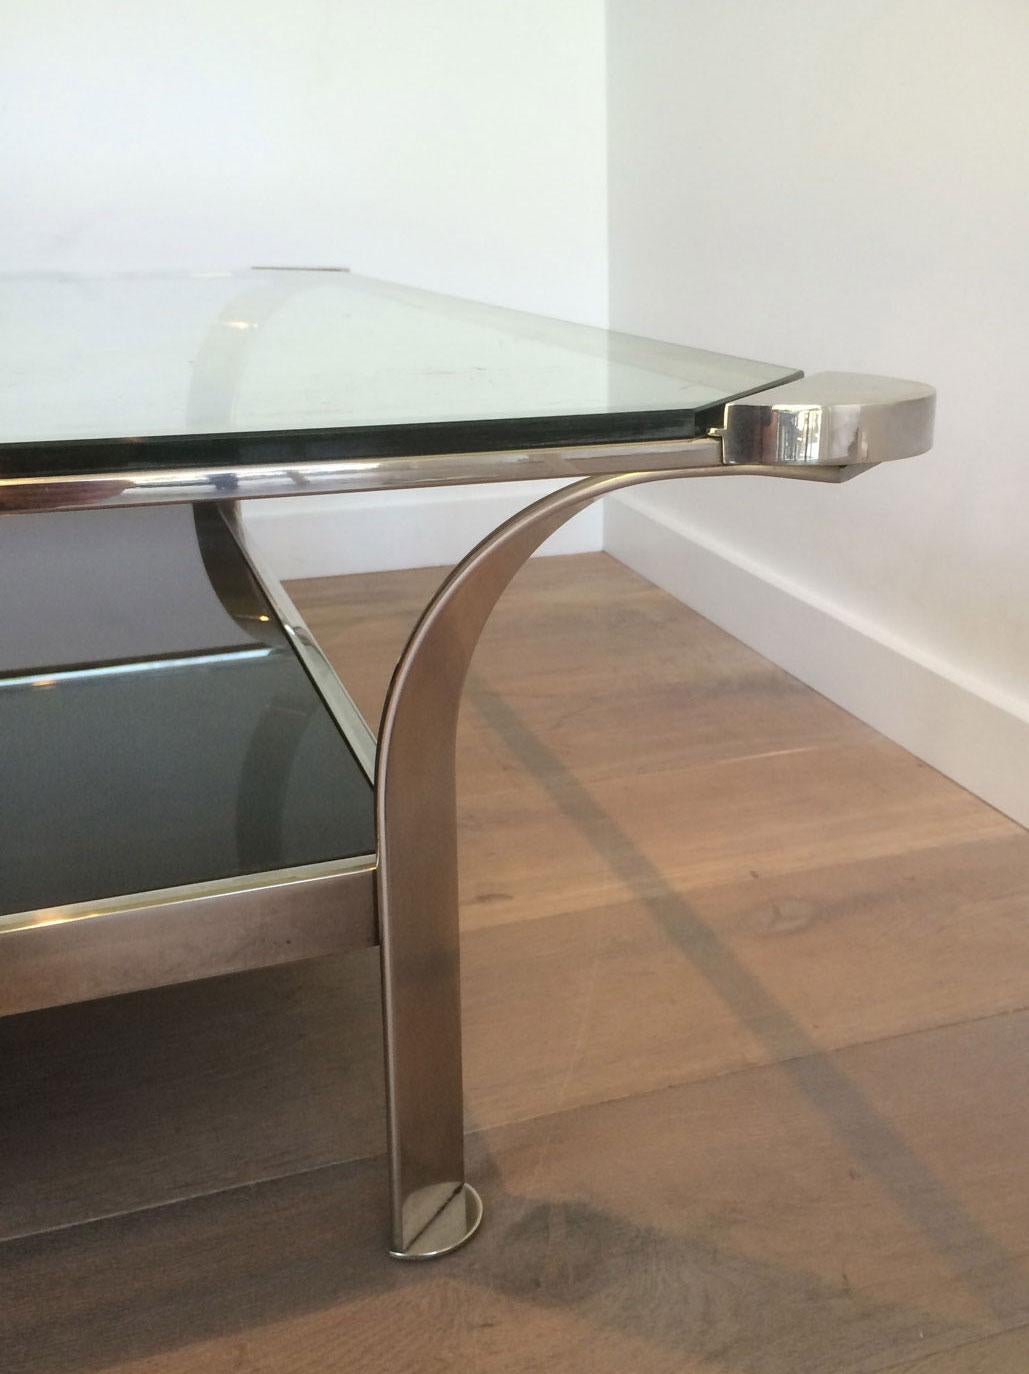 Late 20th Century Large Design Chrome Coffee Table with Glass Shelves For Sale